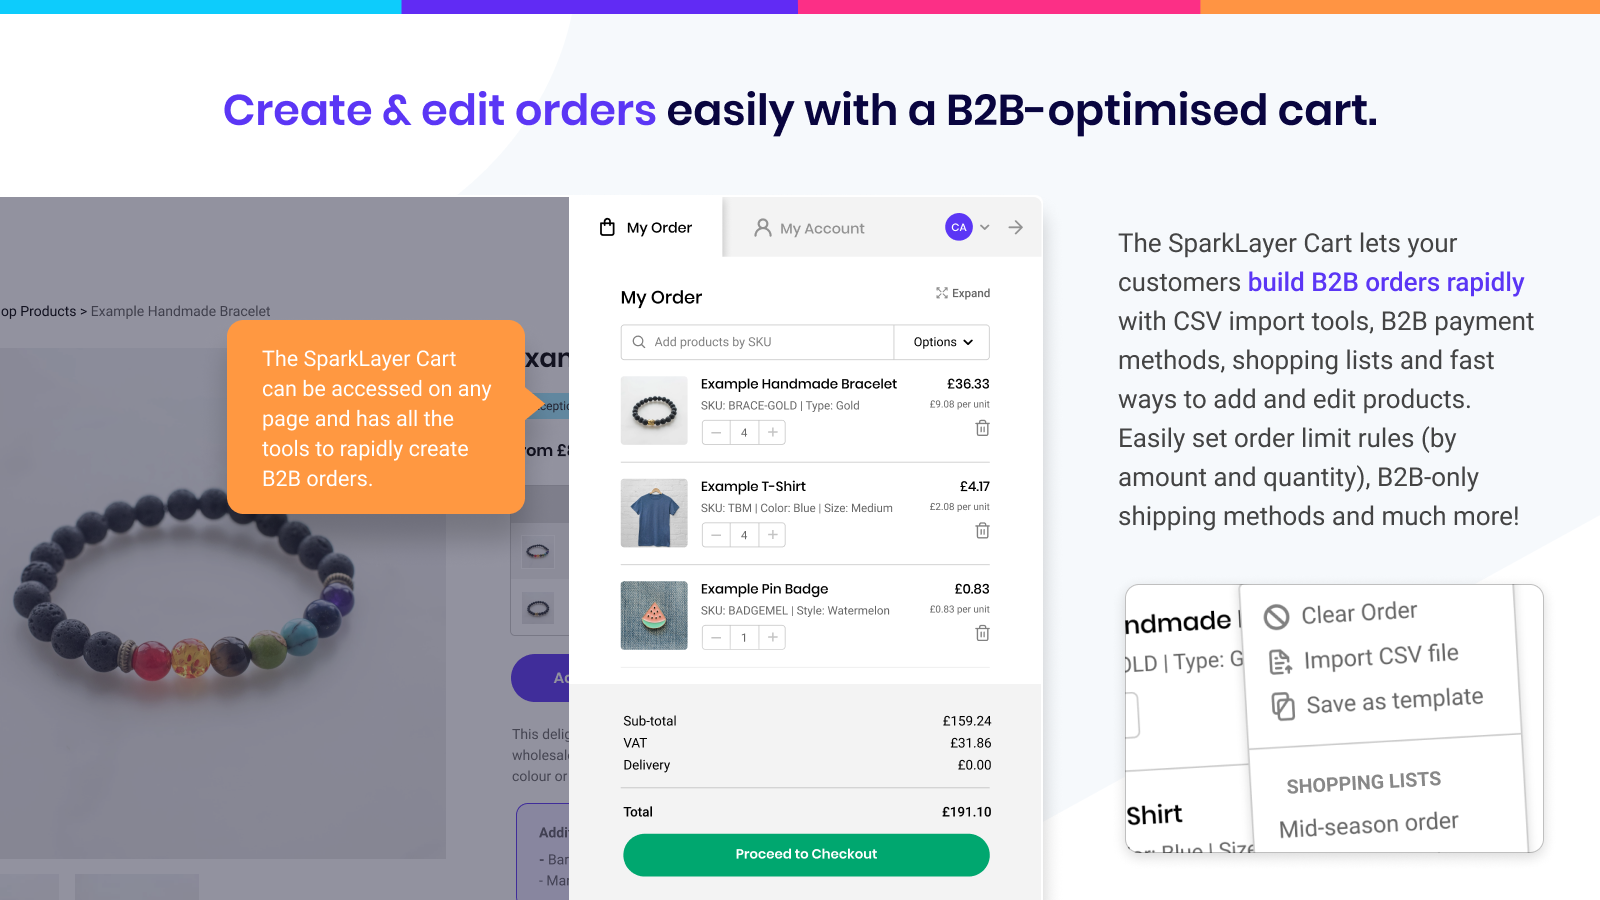 Create & edit orders easily with the Quick Order.